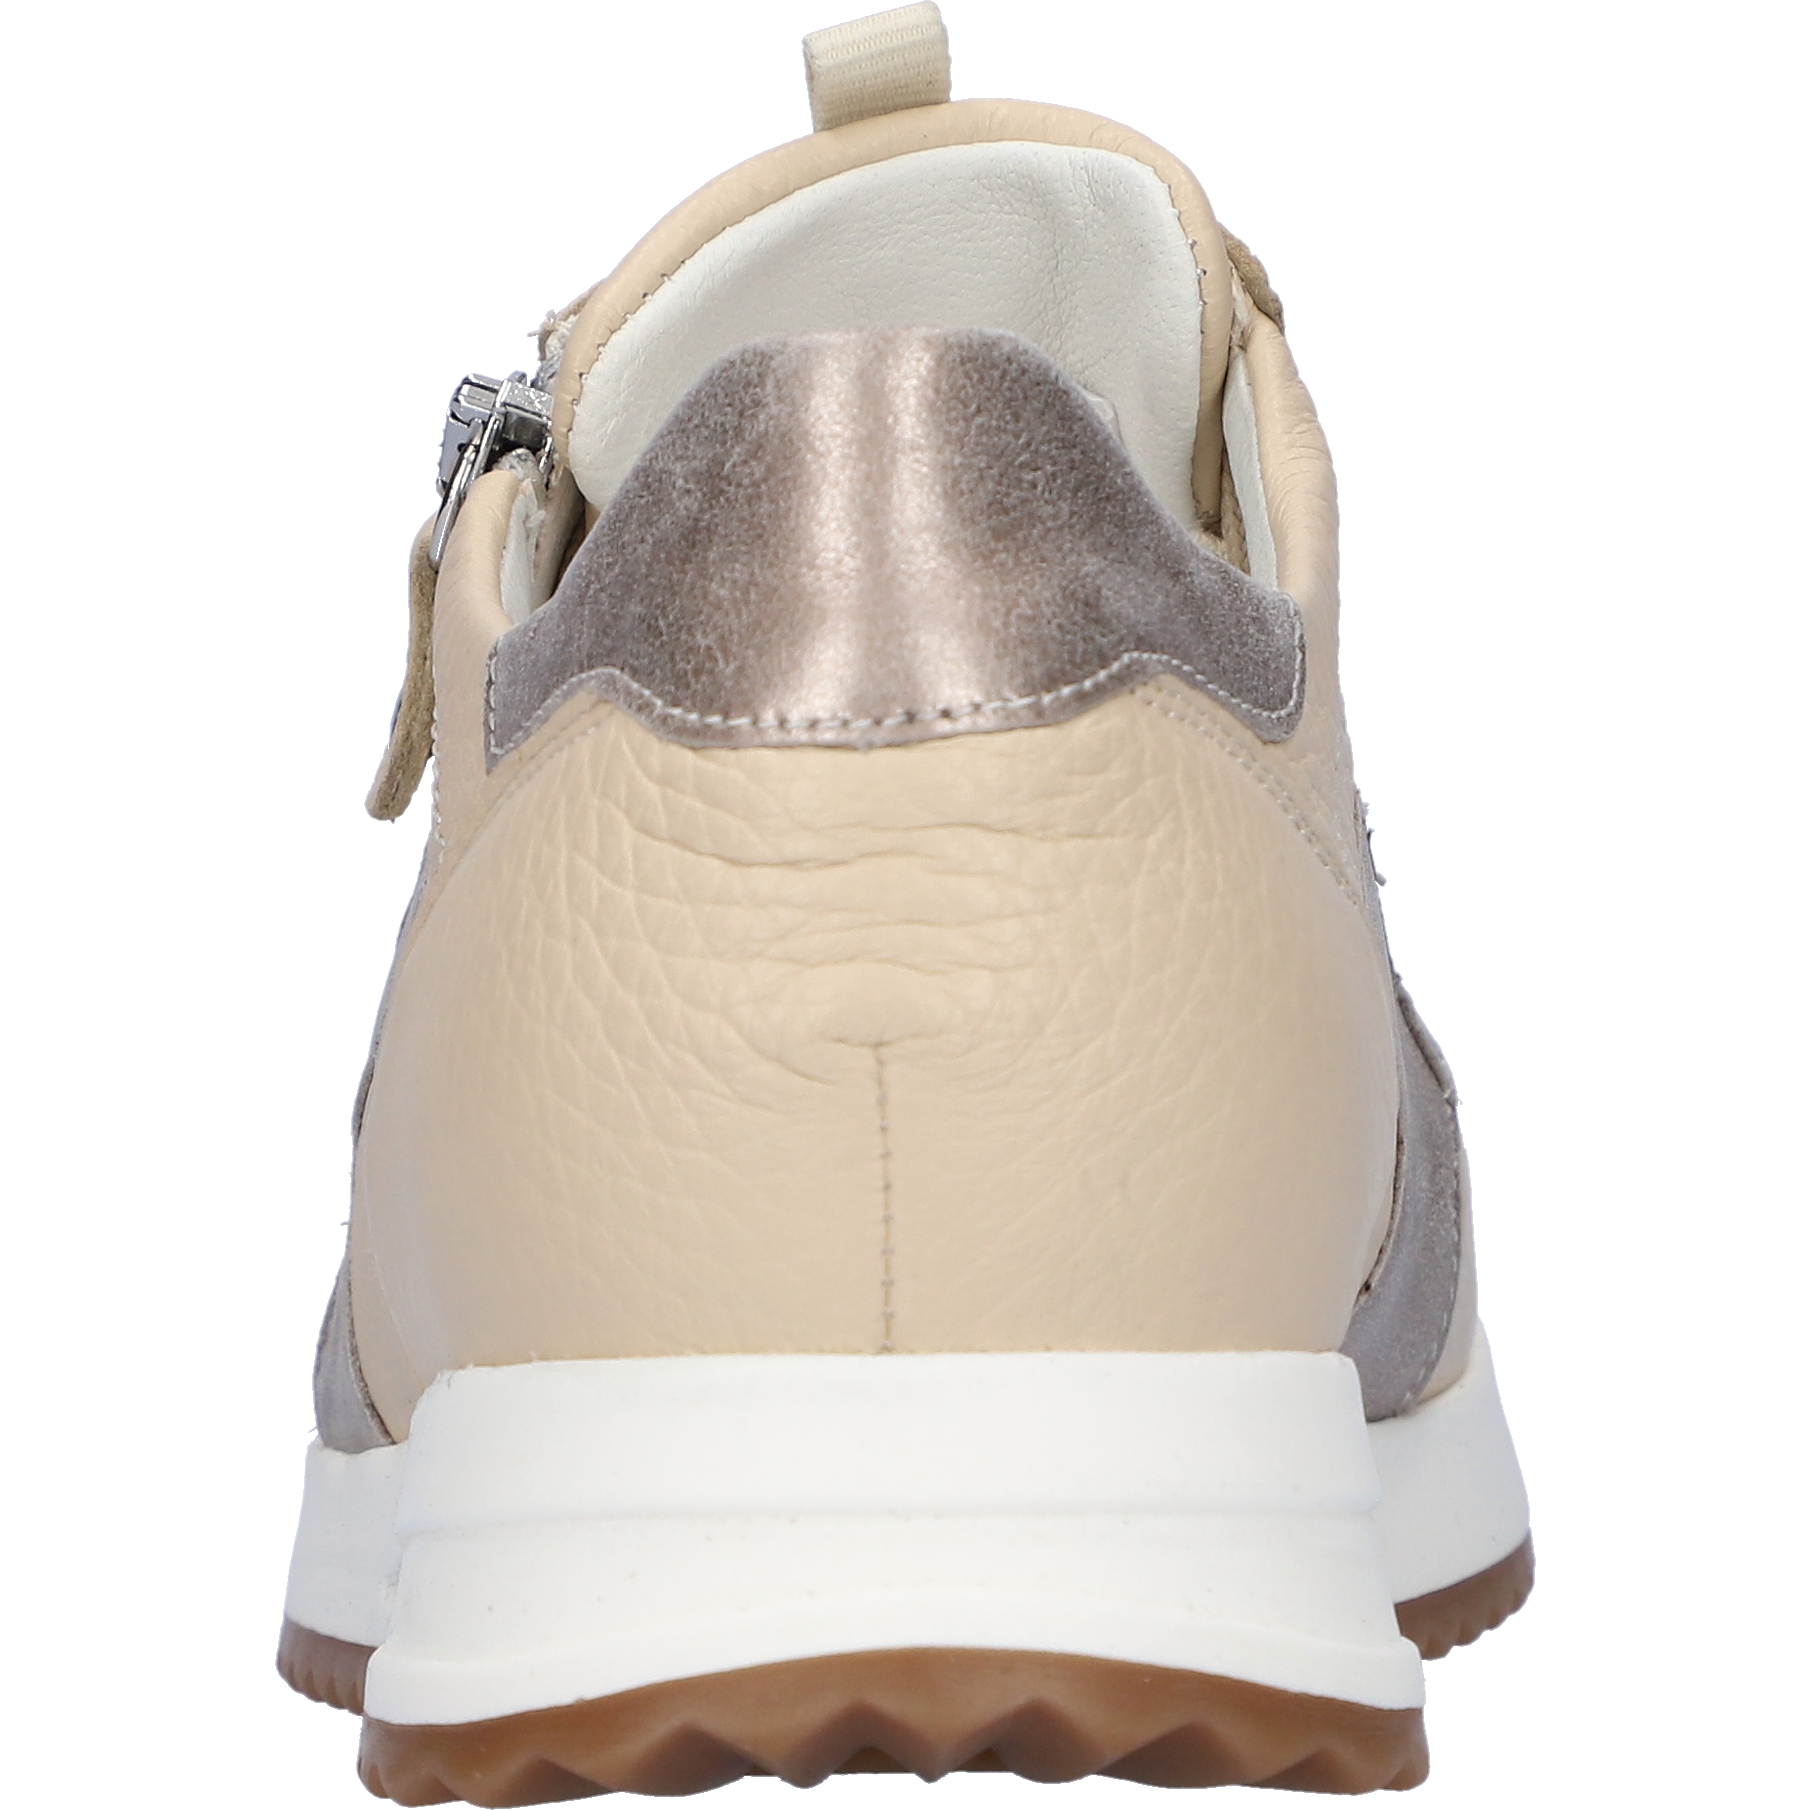 Waldlaufer H-Vicky - Ladies Trainer with Lace and Zip in Beige/Gold .Waldlaufer | Wide Fit Shoes | Wisemans | Bantry | West Cork | Ireland 